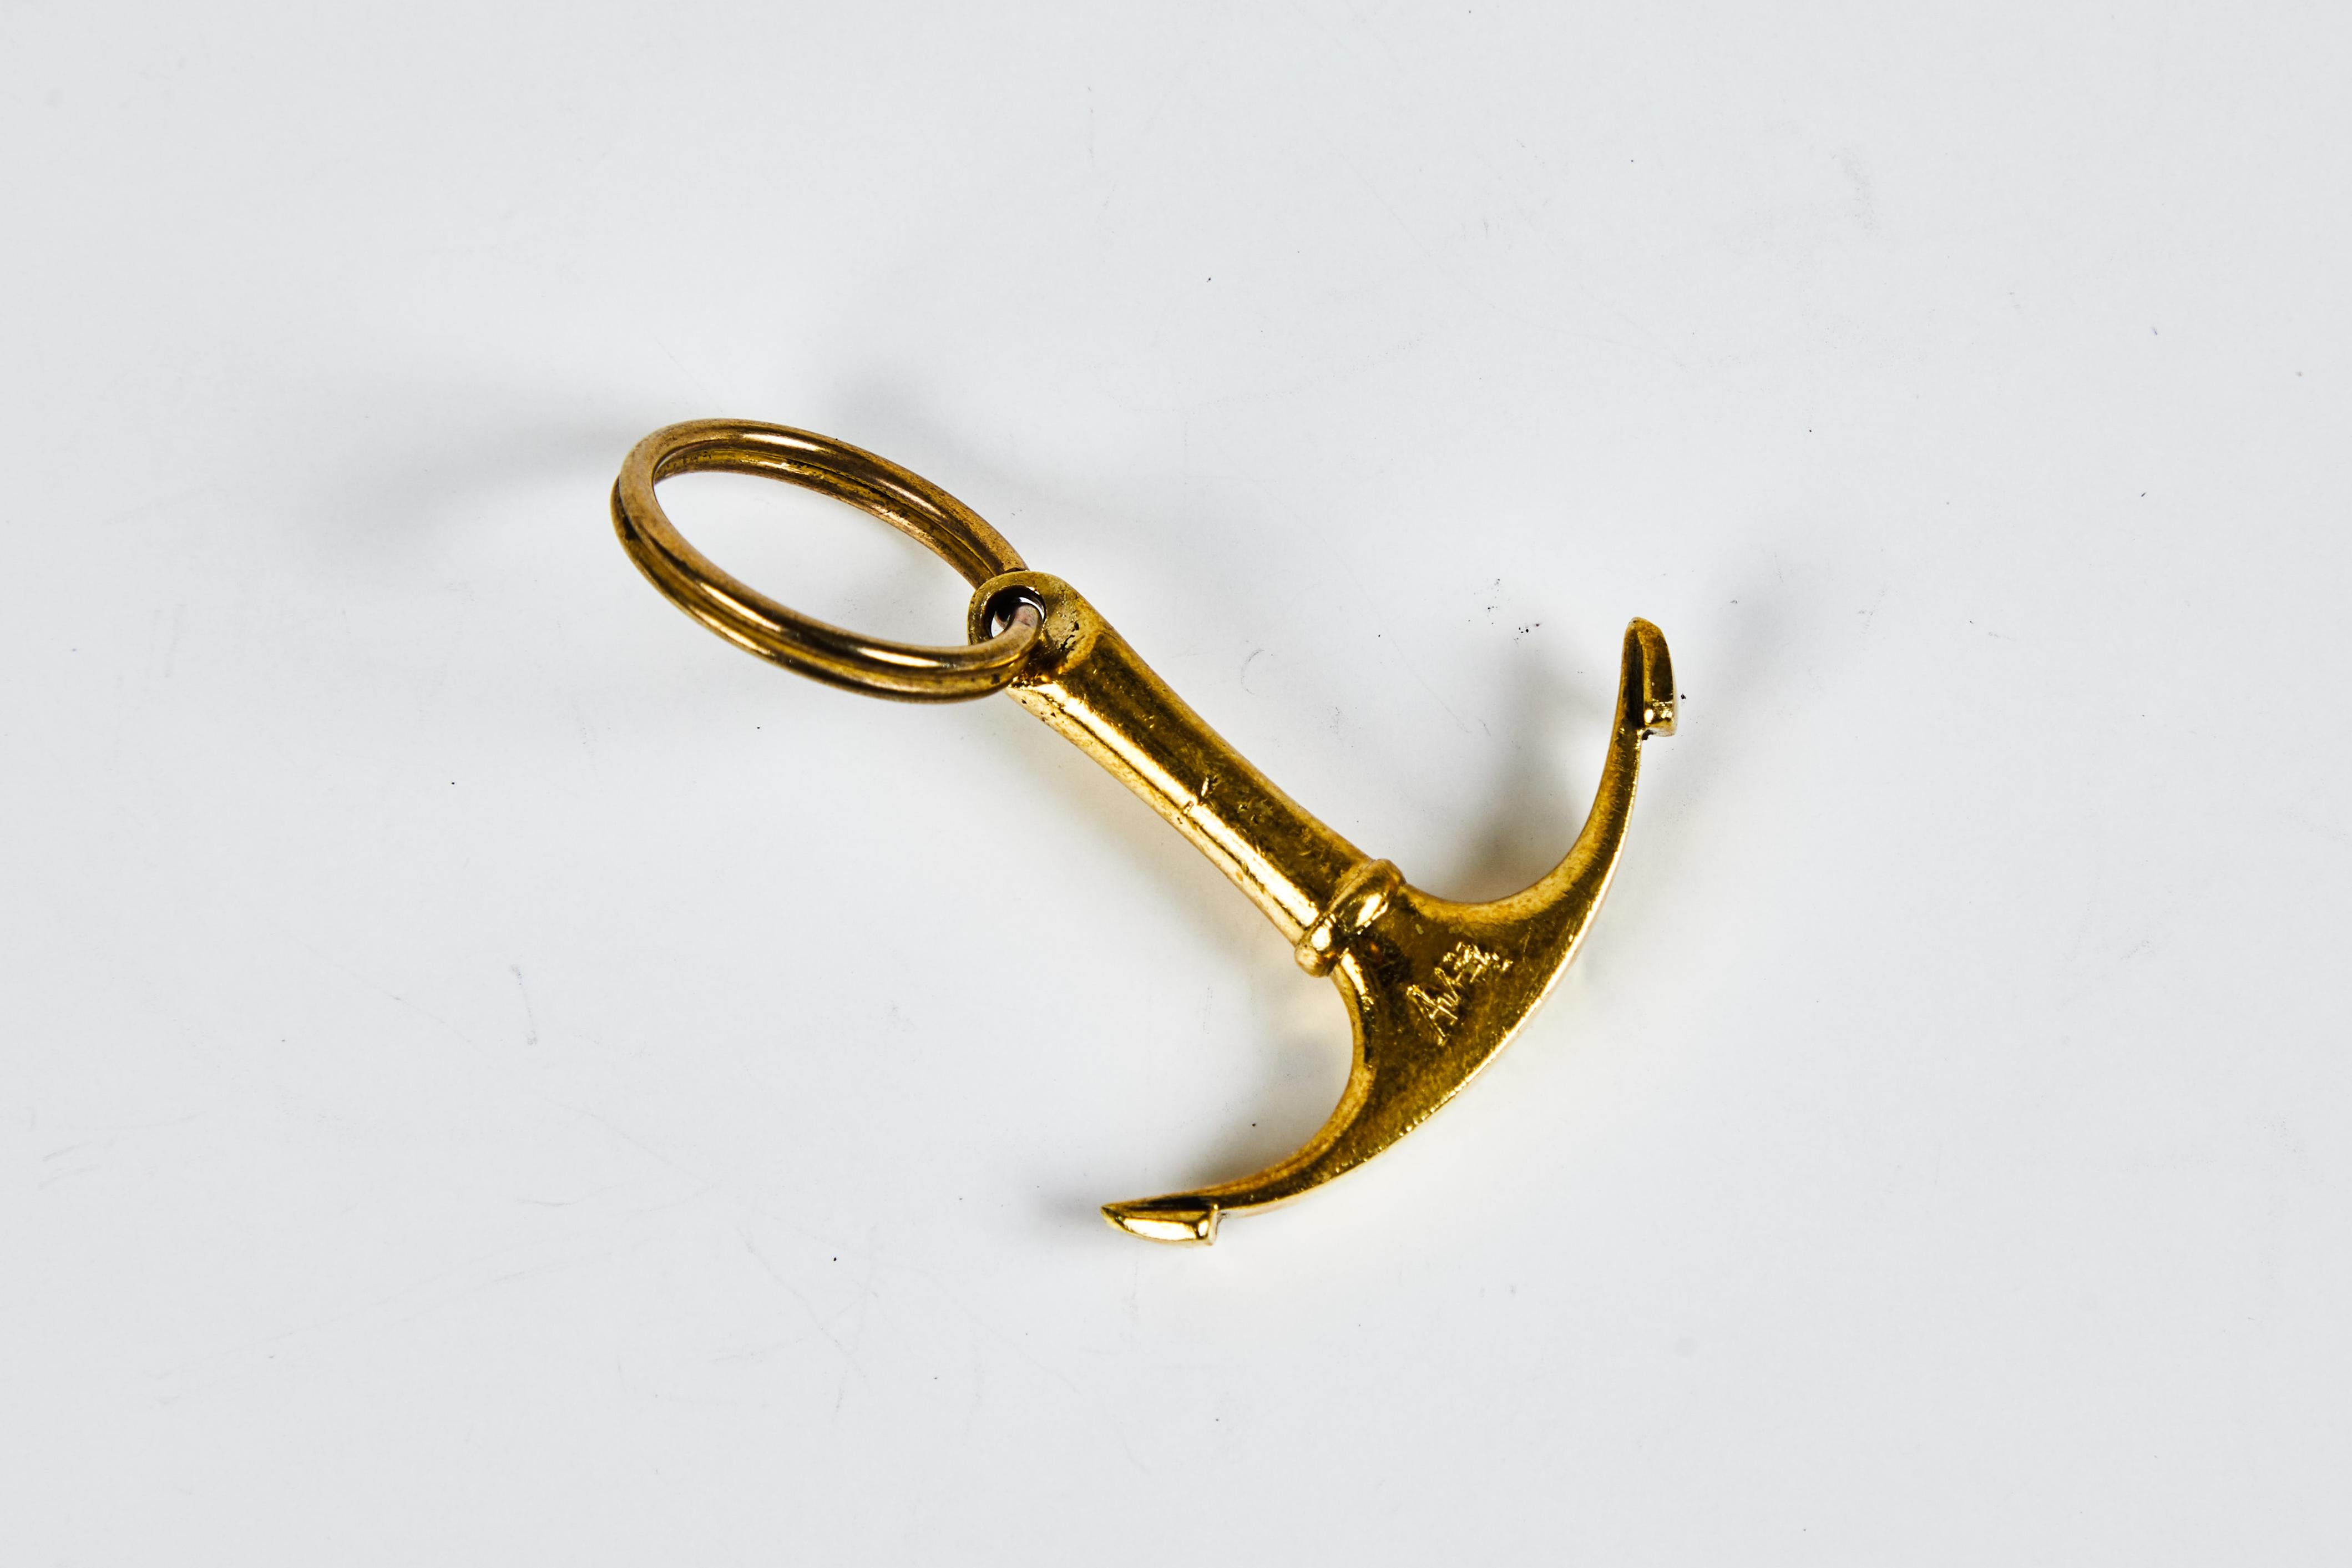 Carl Auböck Model #7151 brass figurine keyring. Designed in the 1950s, this incredibly refined and sculptural object is hand fabricated in polished brass. 

Price is per item. Other Aubock keyrings also available in separate listings. One pair in